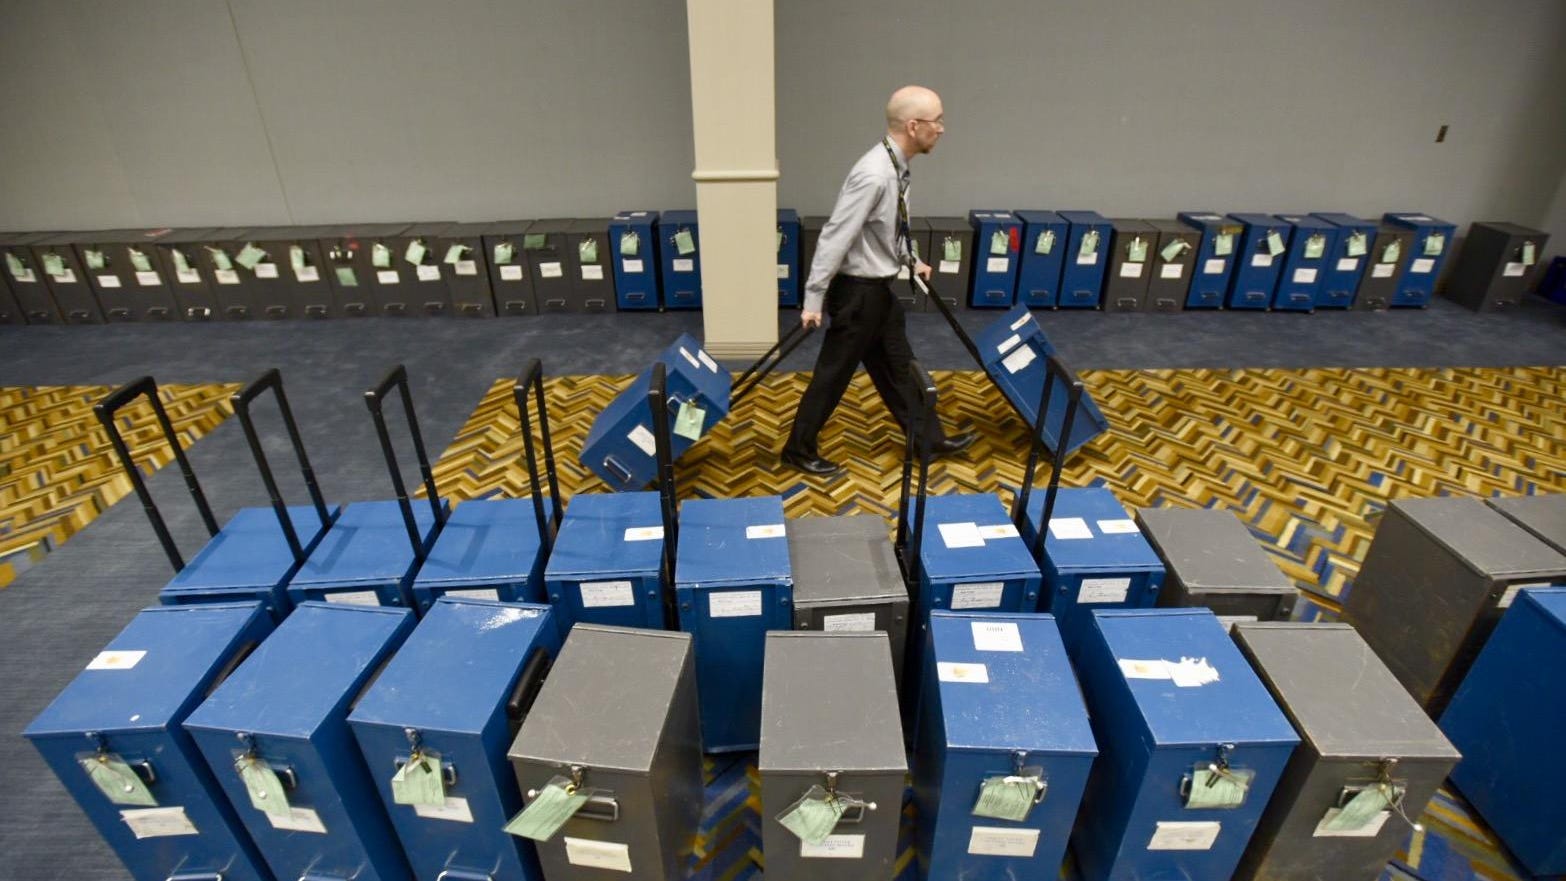 Greg Mahar, deputy executive for the Wayne County Clerk's Office, organizes ballot boxes in a storage room at Cobo Hall in preparation for a recount of Michigan votes, December 5, 2016.